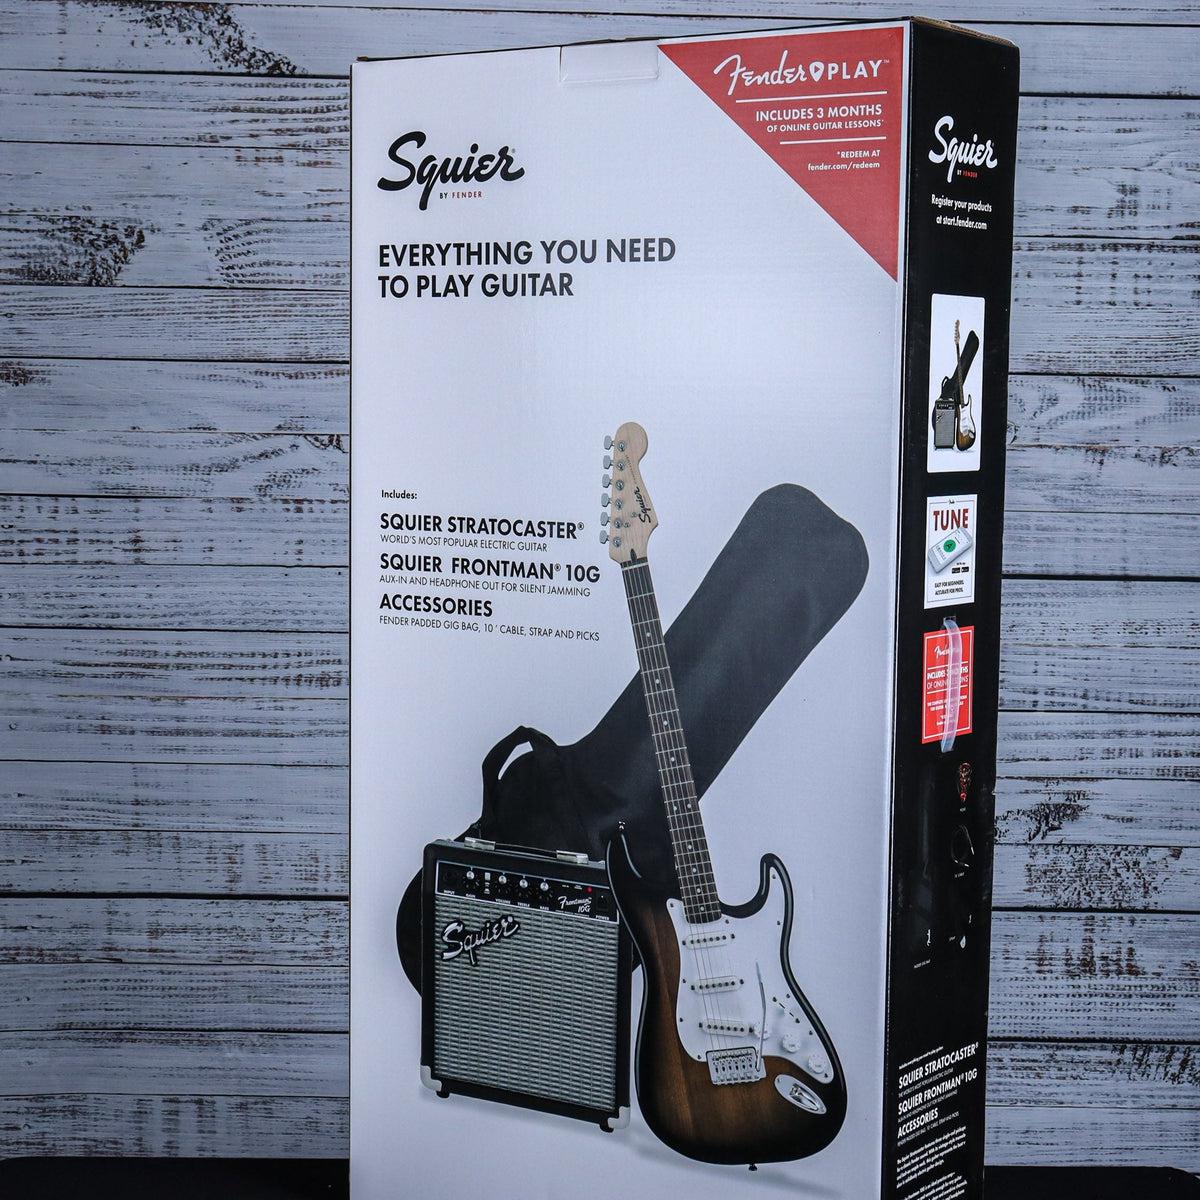 Squier by Fender Stratocaster Pack -Black